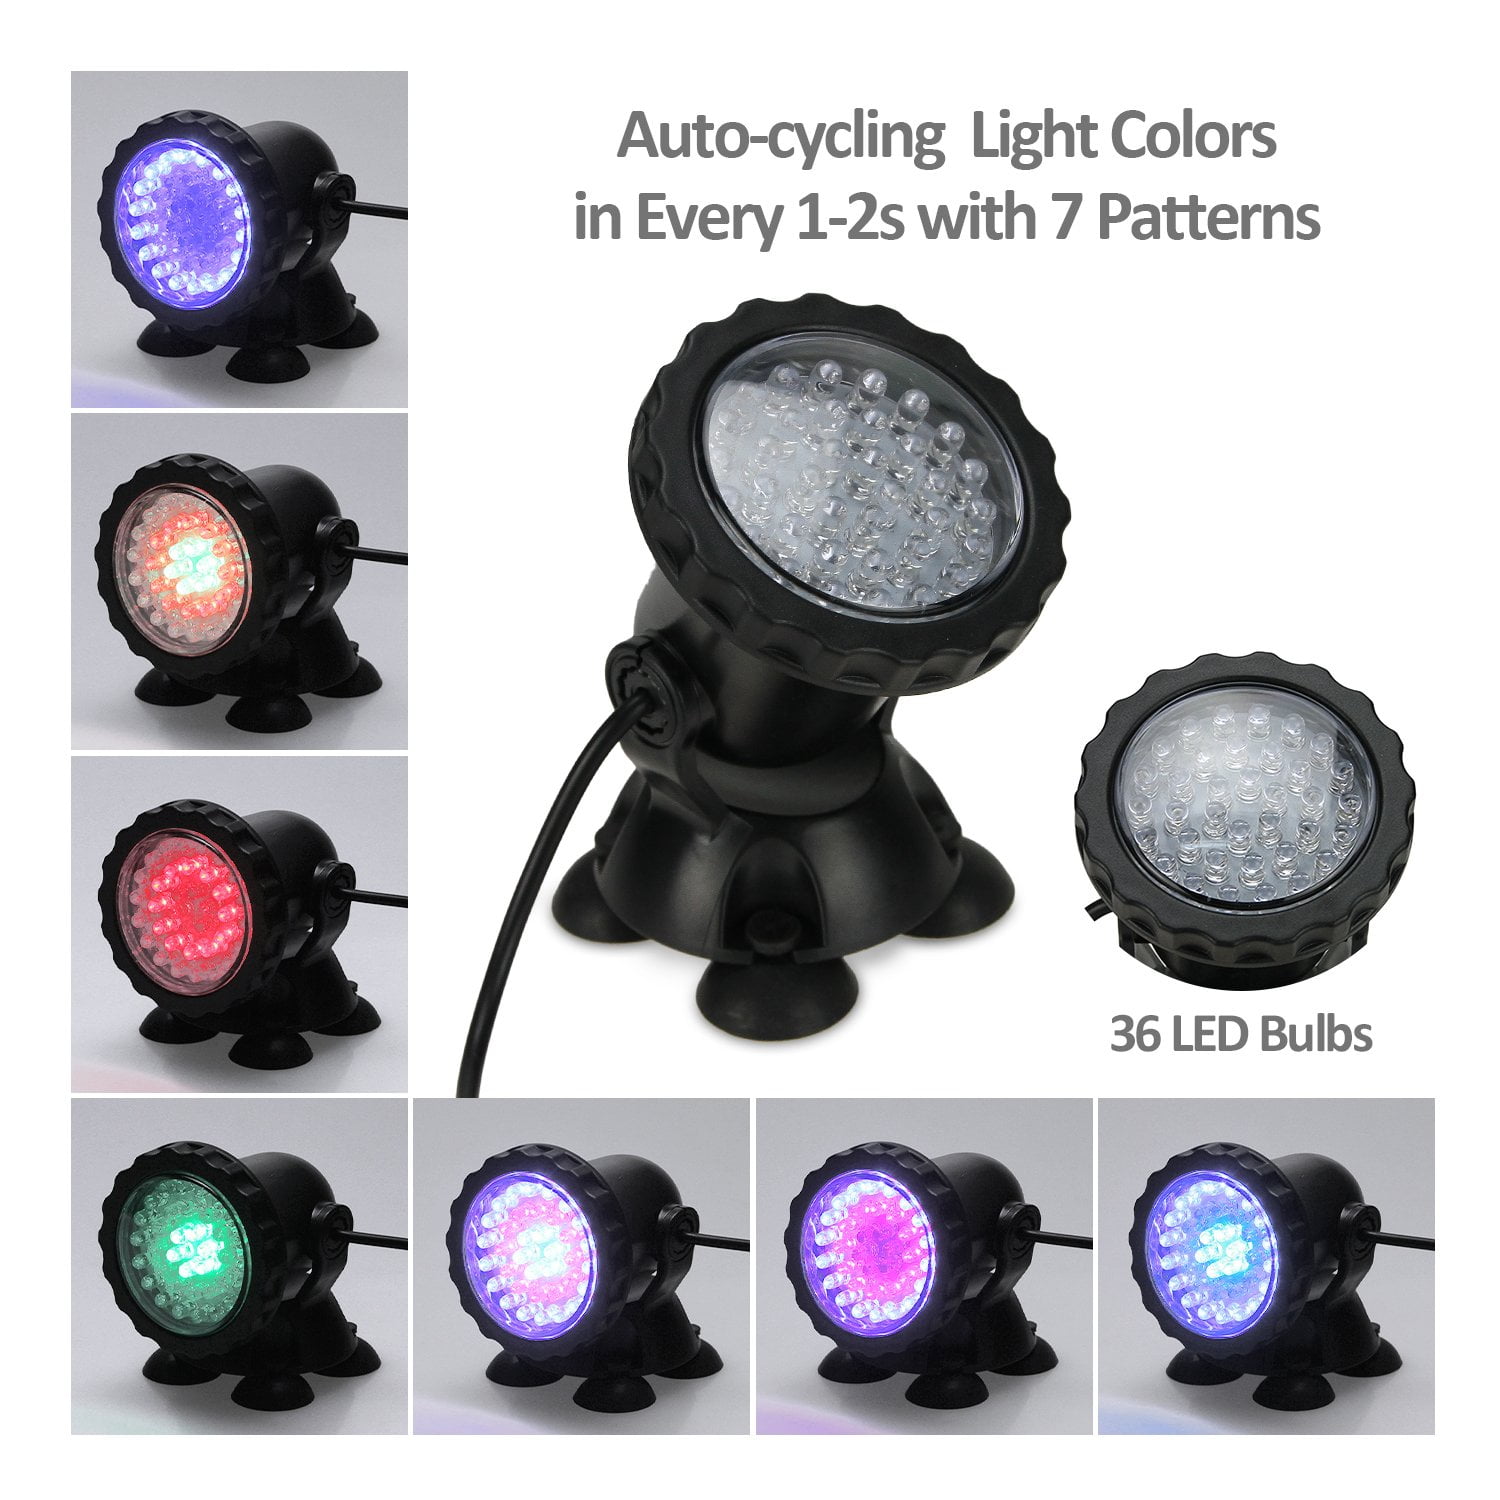 Set of 3 IP68 Waterproof Underwater Aquarium Spotlight 36-LED Multi-Color Changing Decoration Landscape Spot Light for Lawn Pool Fish Fountain Northbear Pond Lights Submersible Remote Control Lamp 